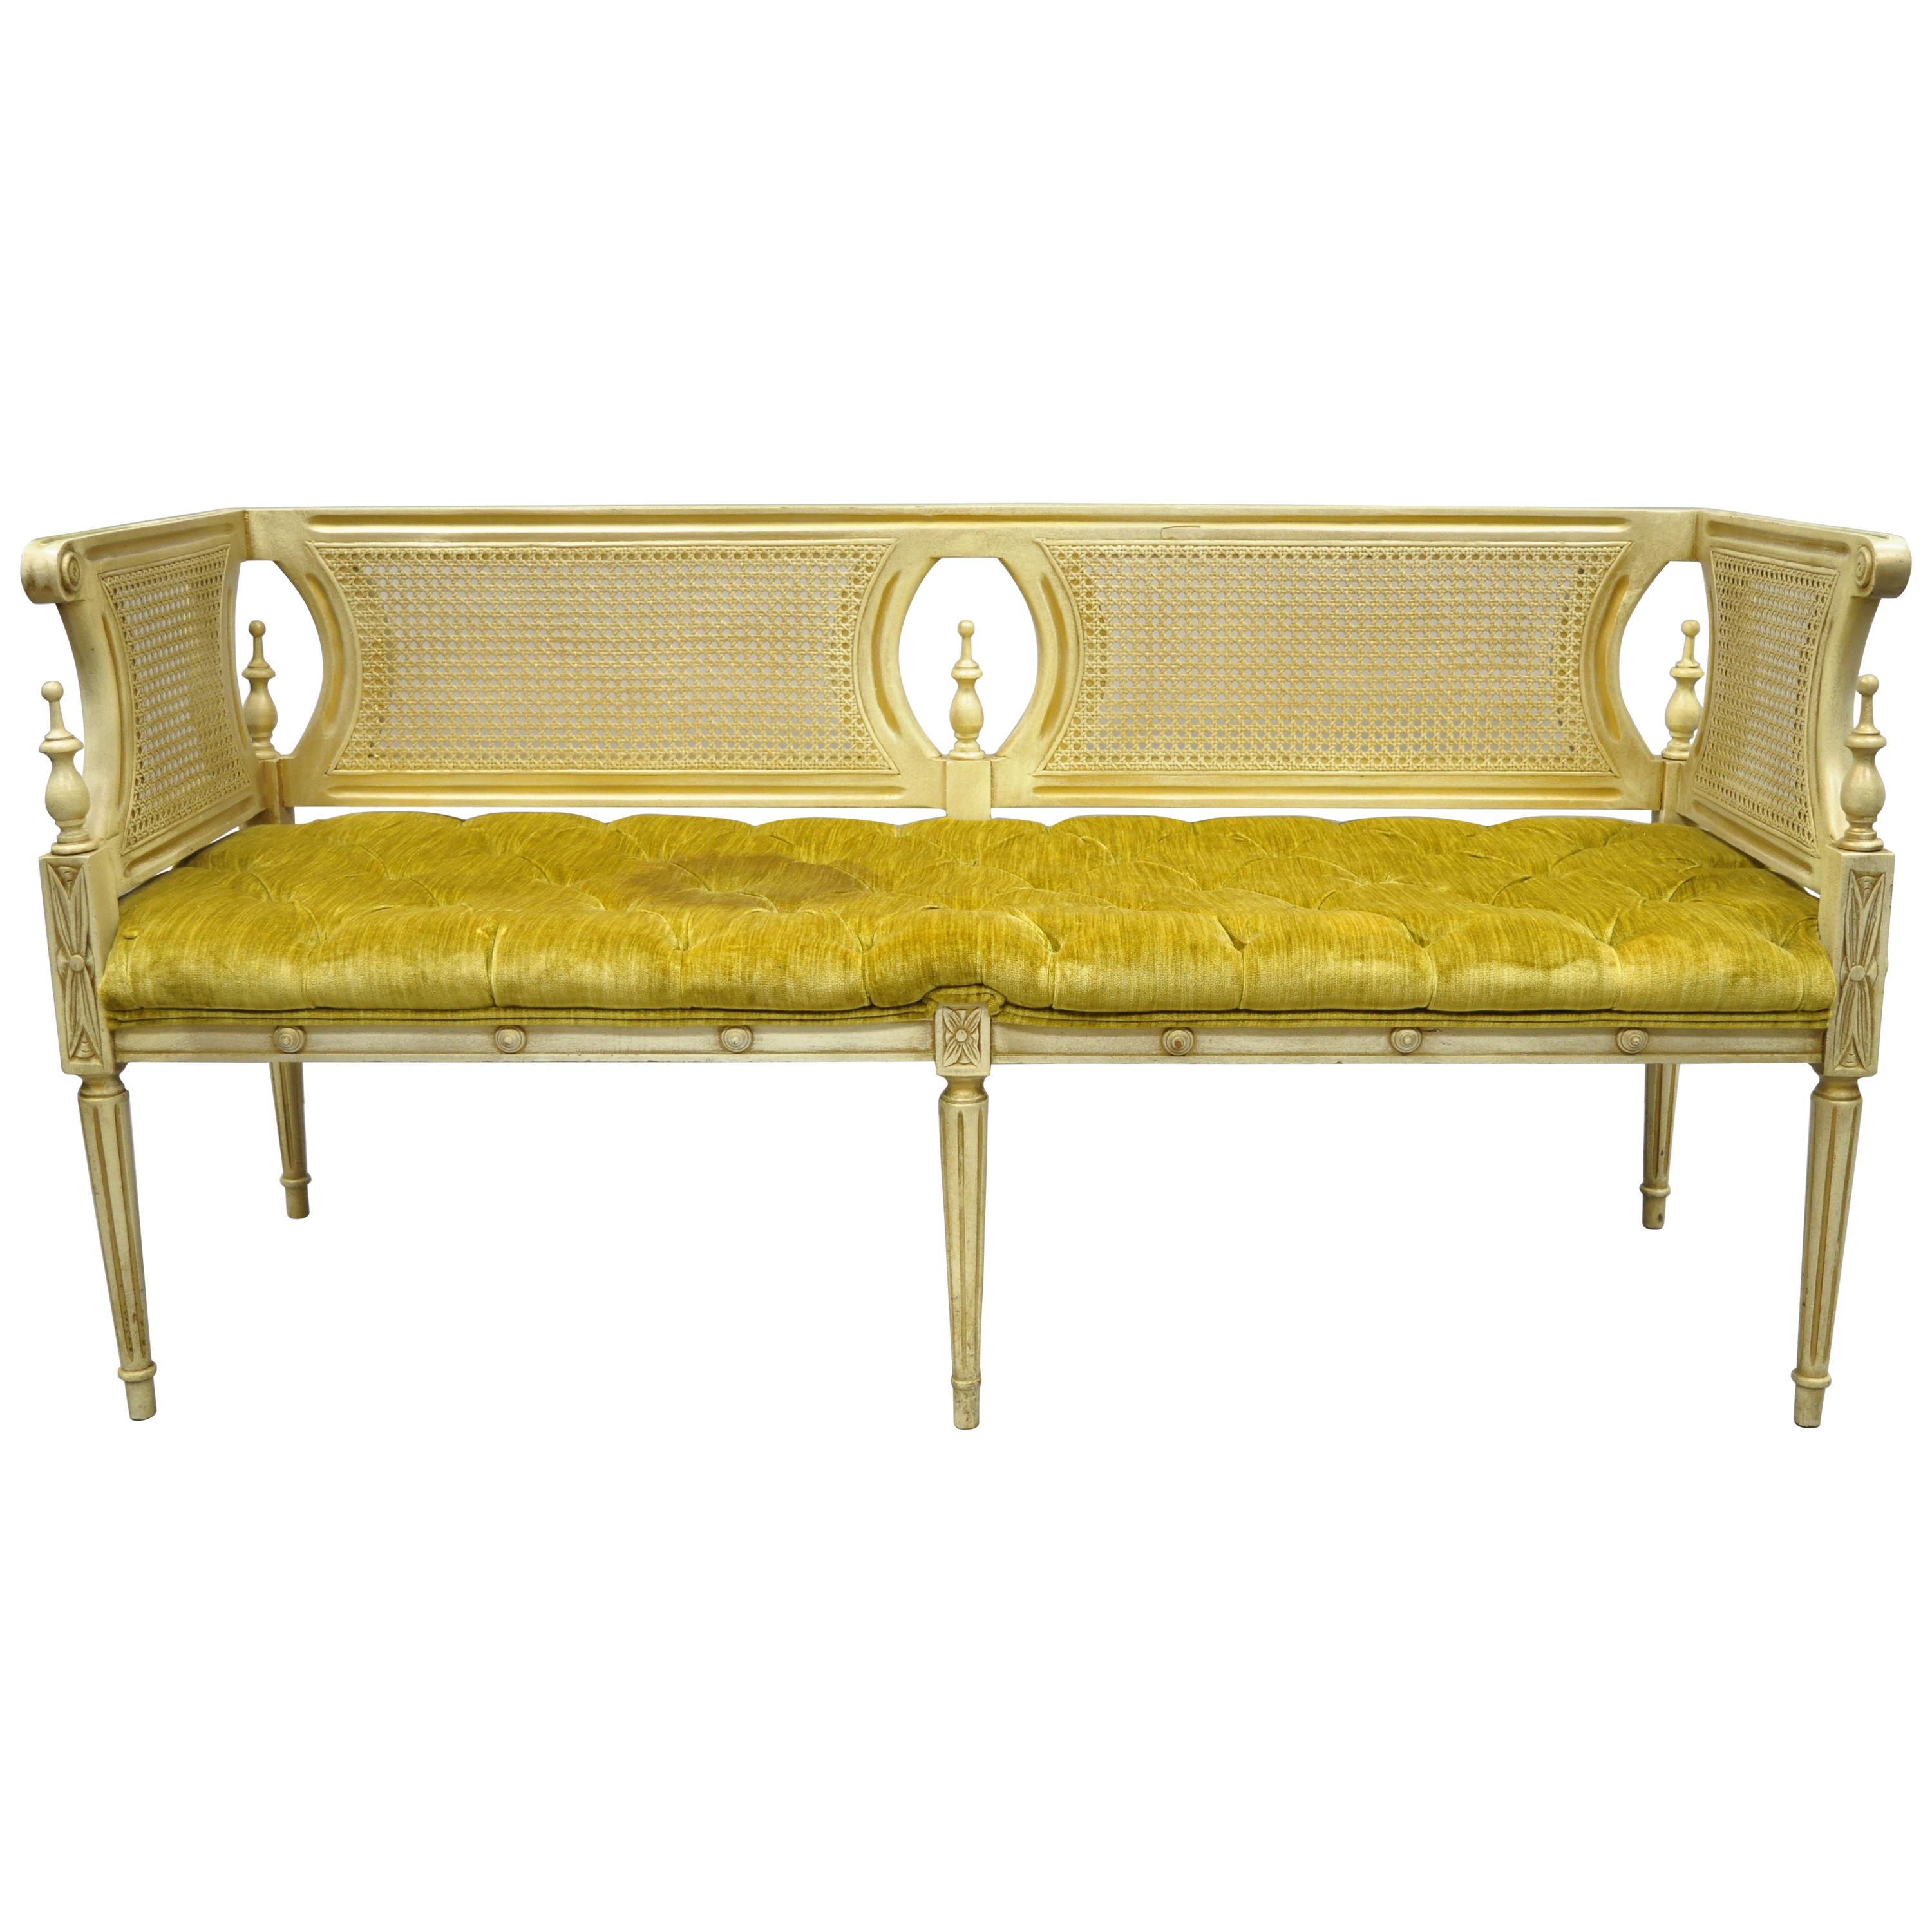 Vintage French Provincial Louis XVI Style Cane Back Cream and Gold Bench Settee